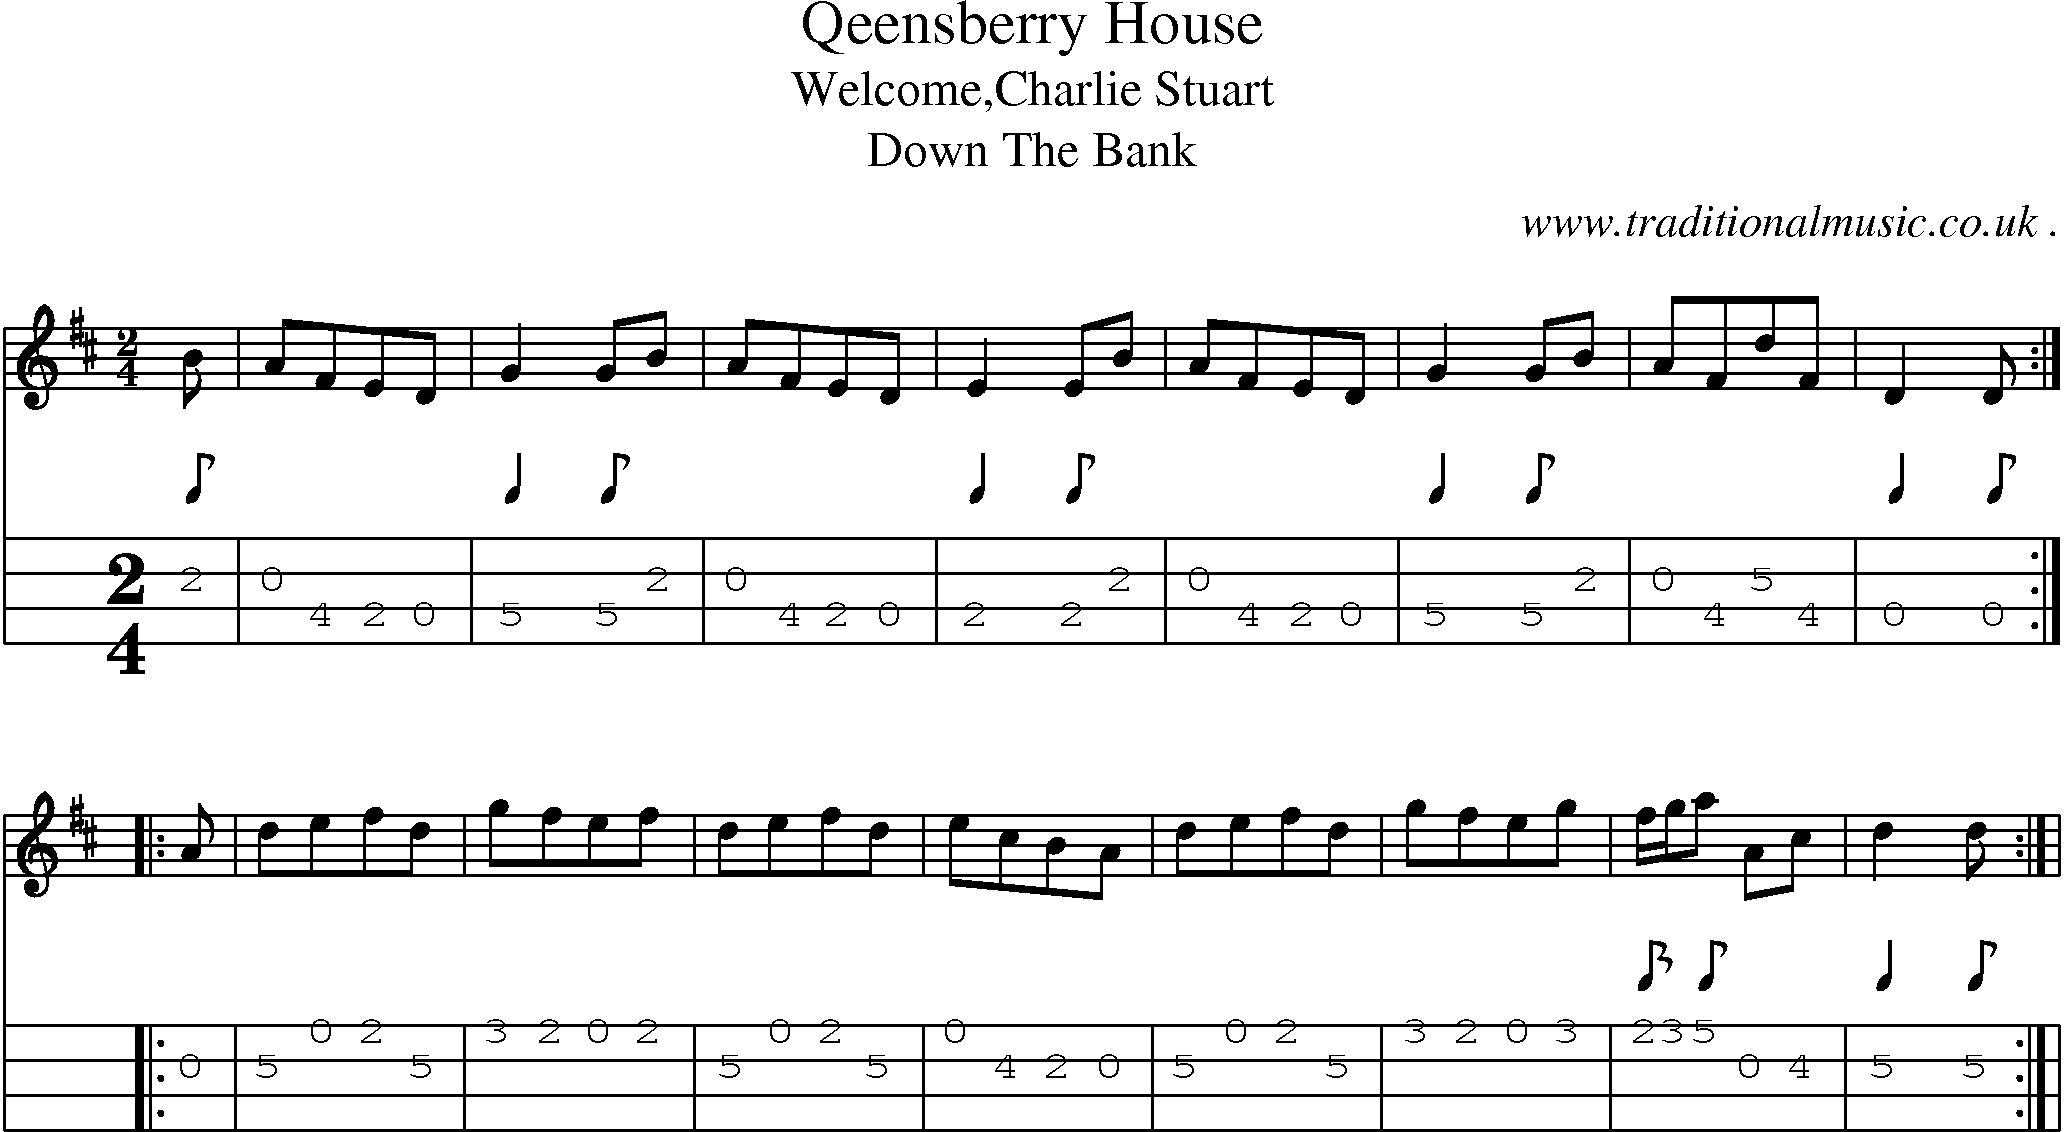 Sheet-Music and Mandolin Tabs for Qeensberry House